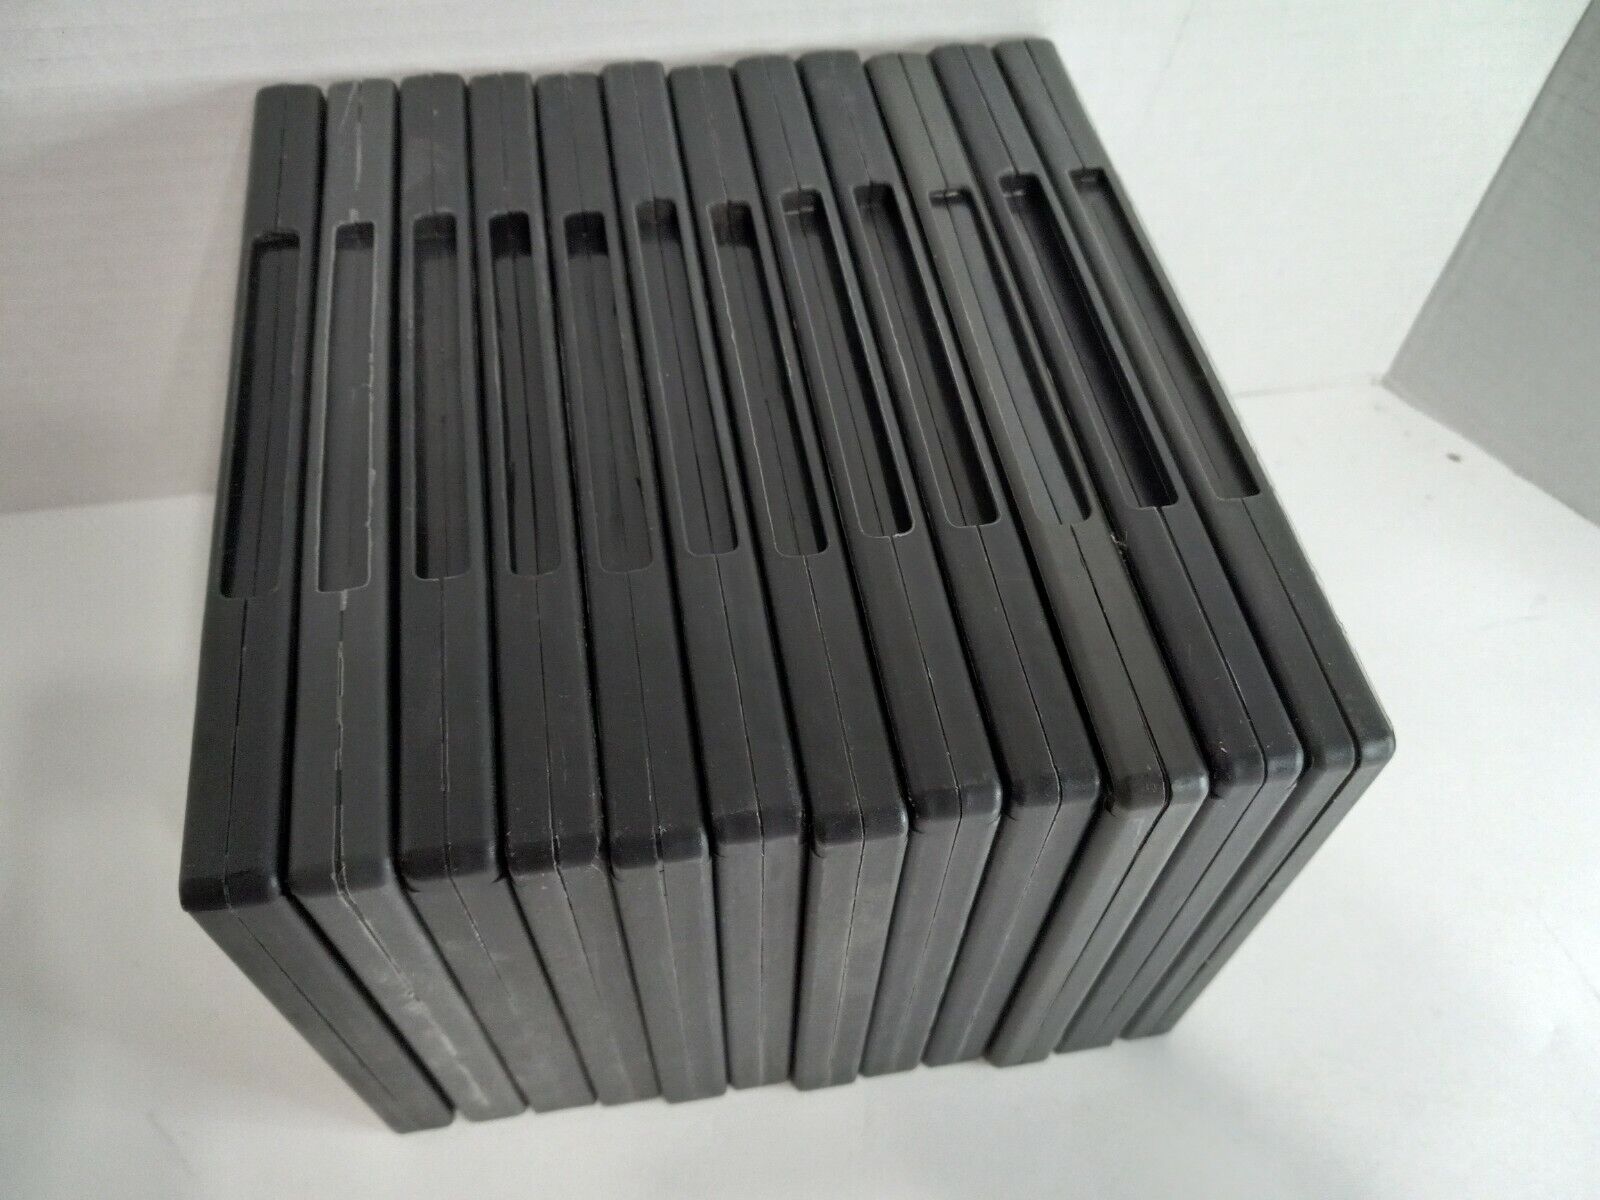 lot of 12 Black Empty Standard Single DVD Cases Boxes 14mm Disc